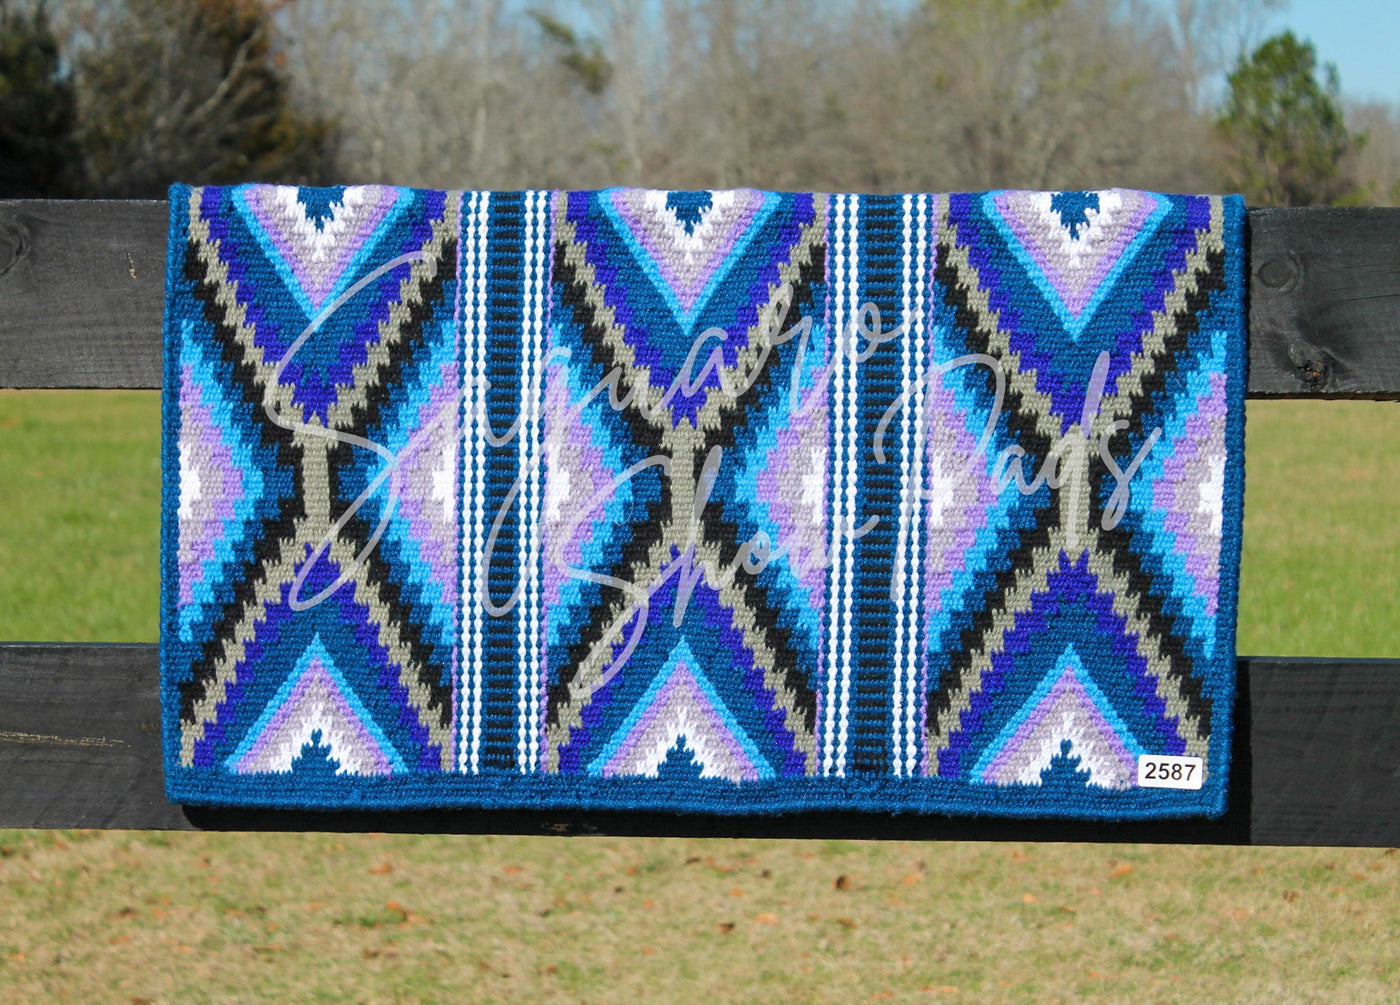 #2587 "X-Factor" Ranch Pad - Re-Order